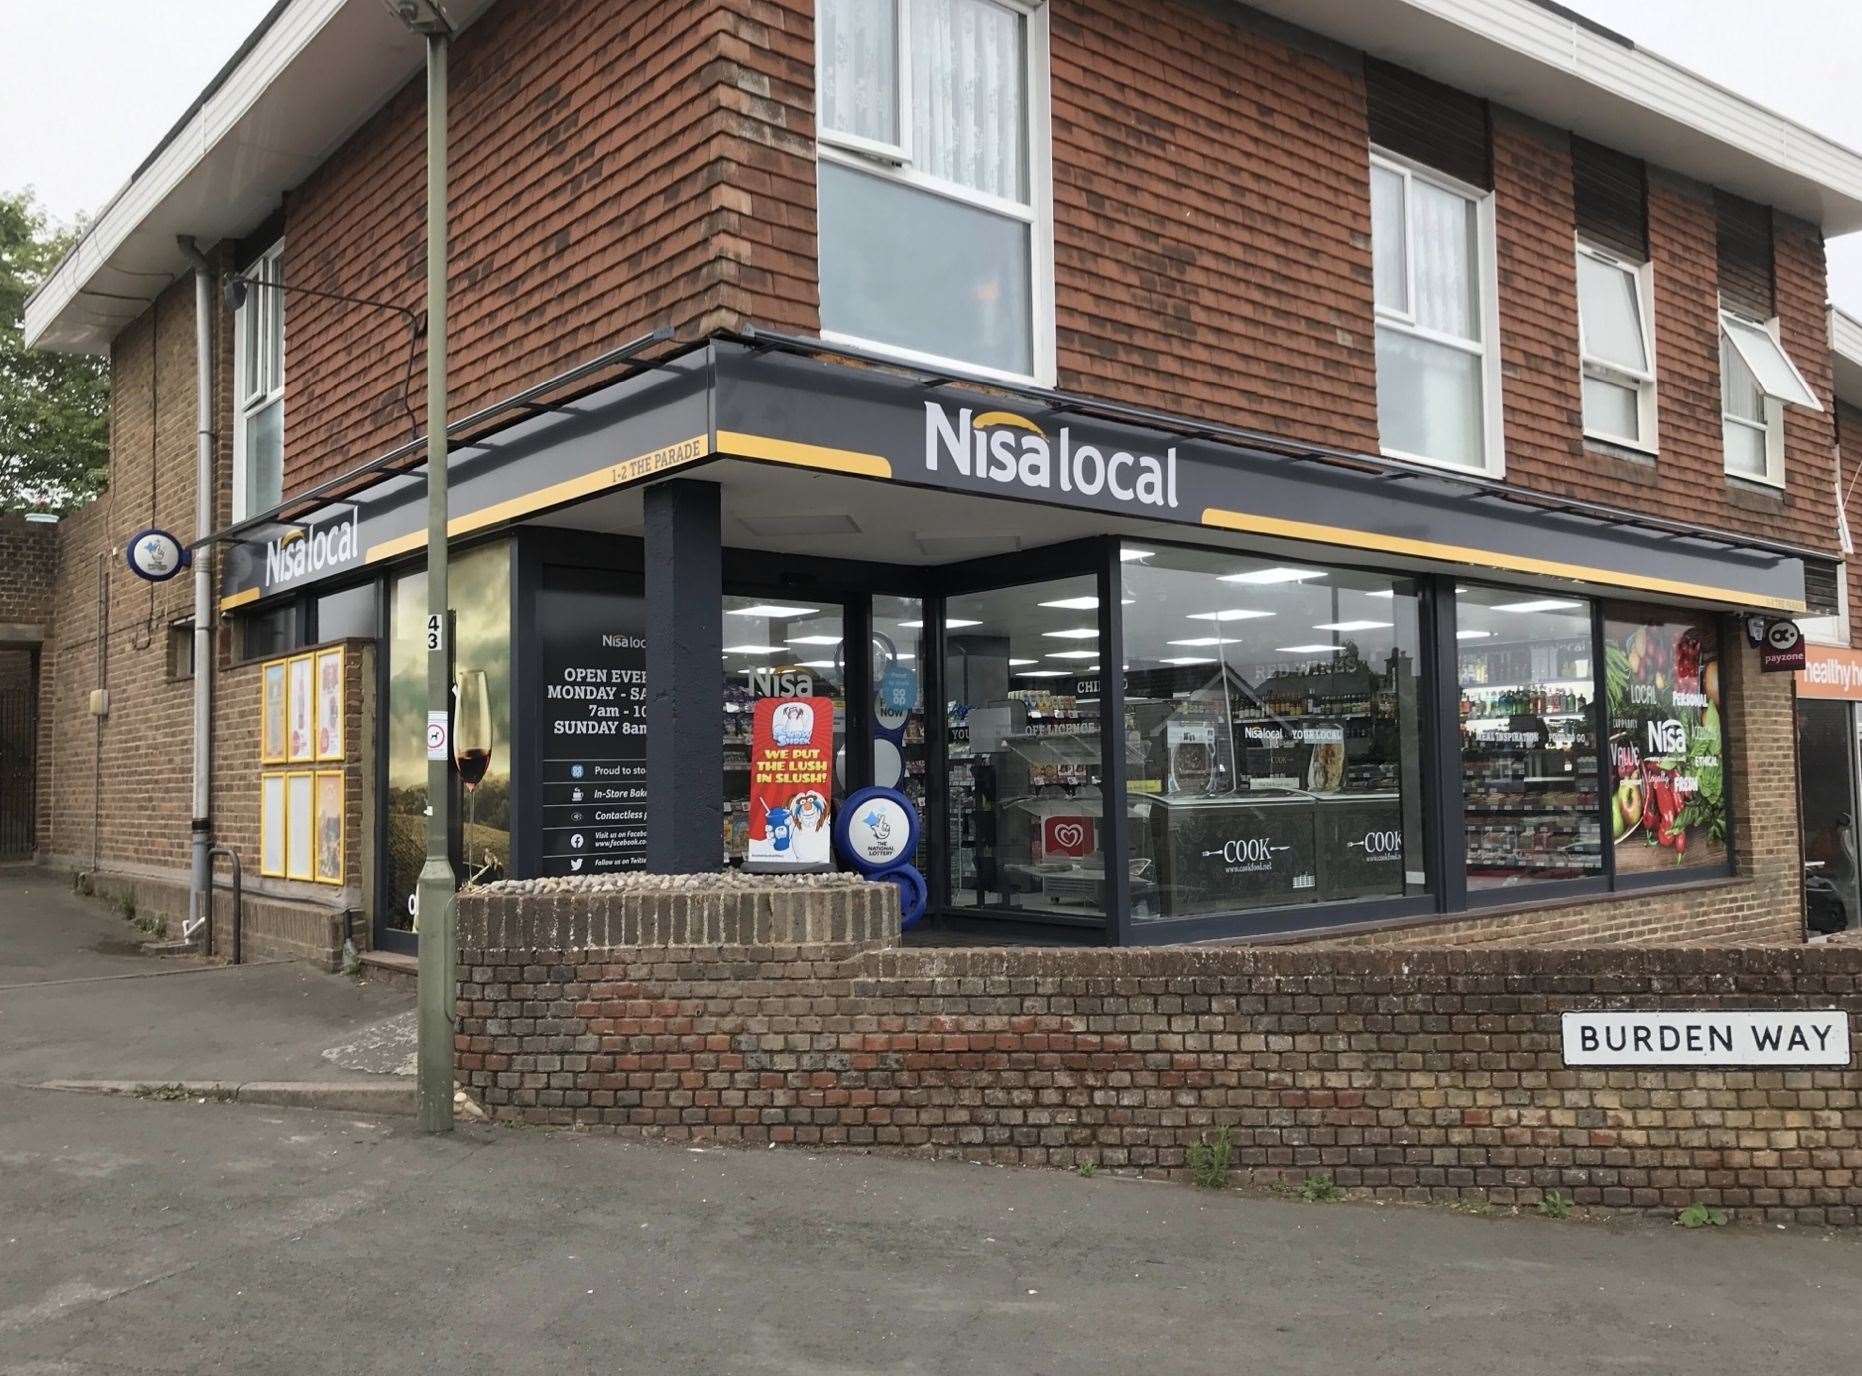 How the Nisa Local could look in Faversham